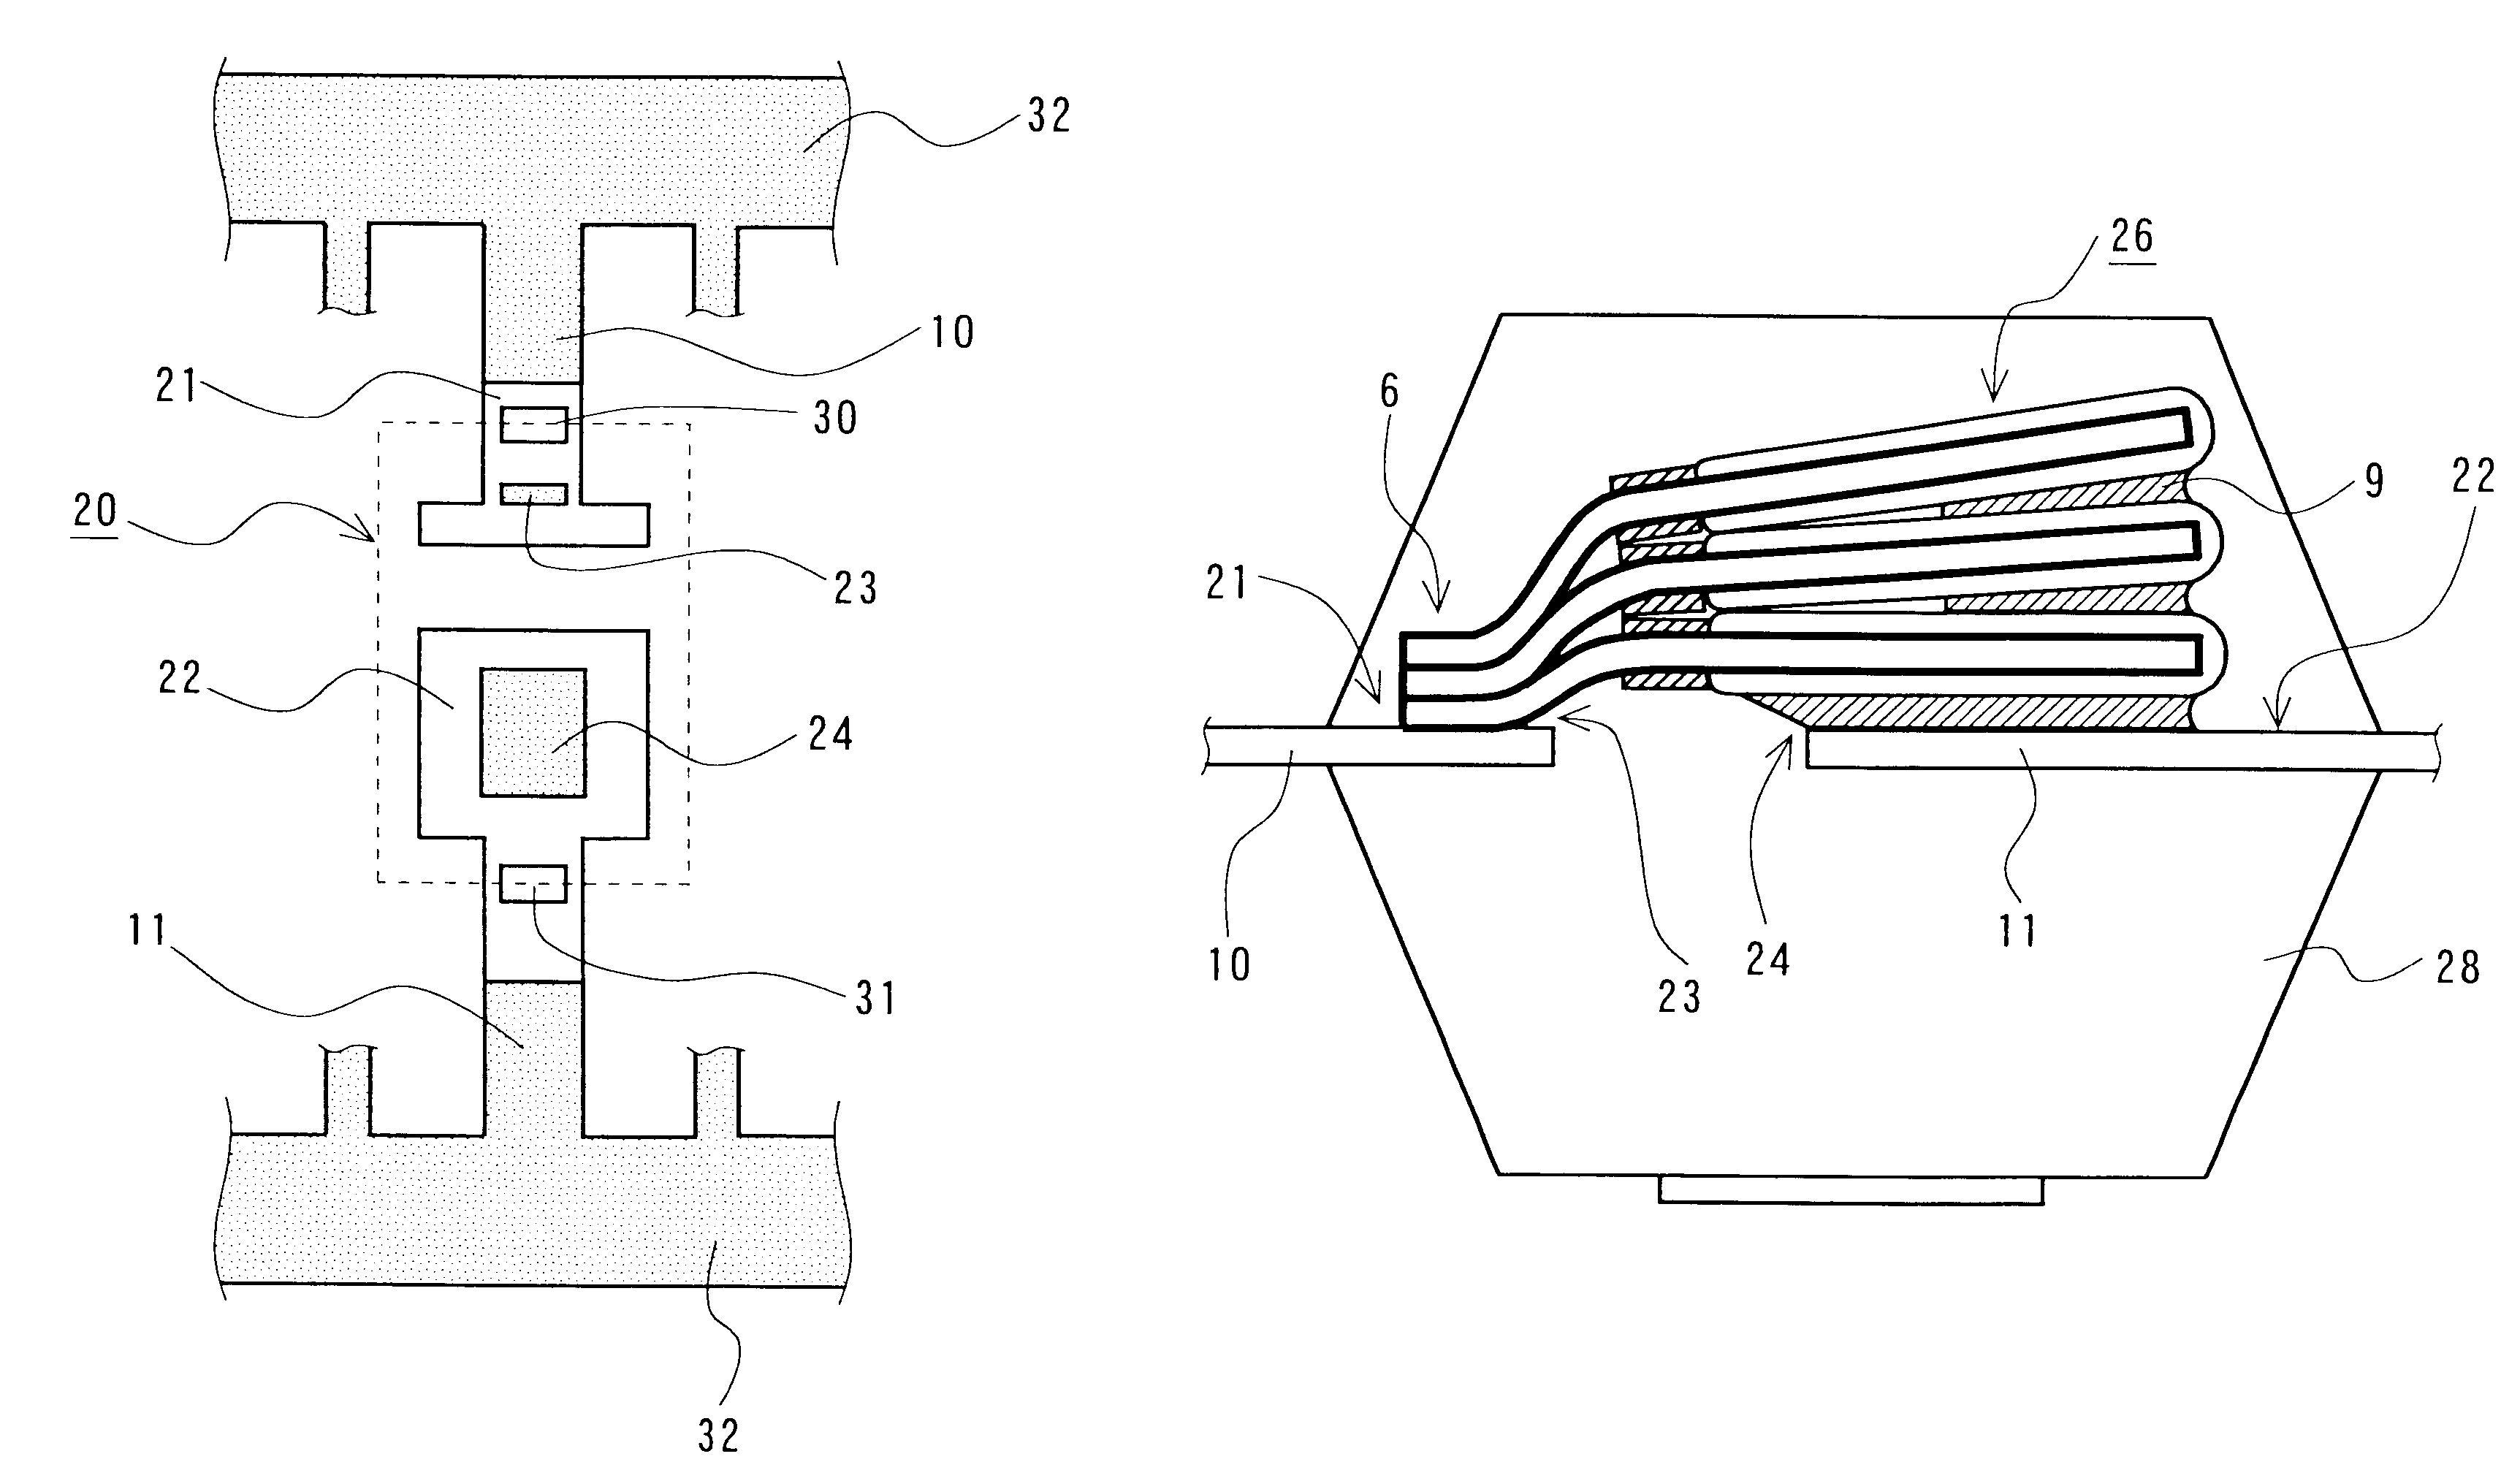 Solid electrolytic capacitor and manufacturing method thereof